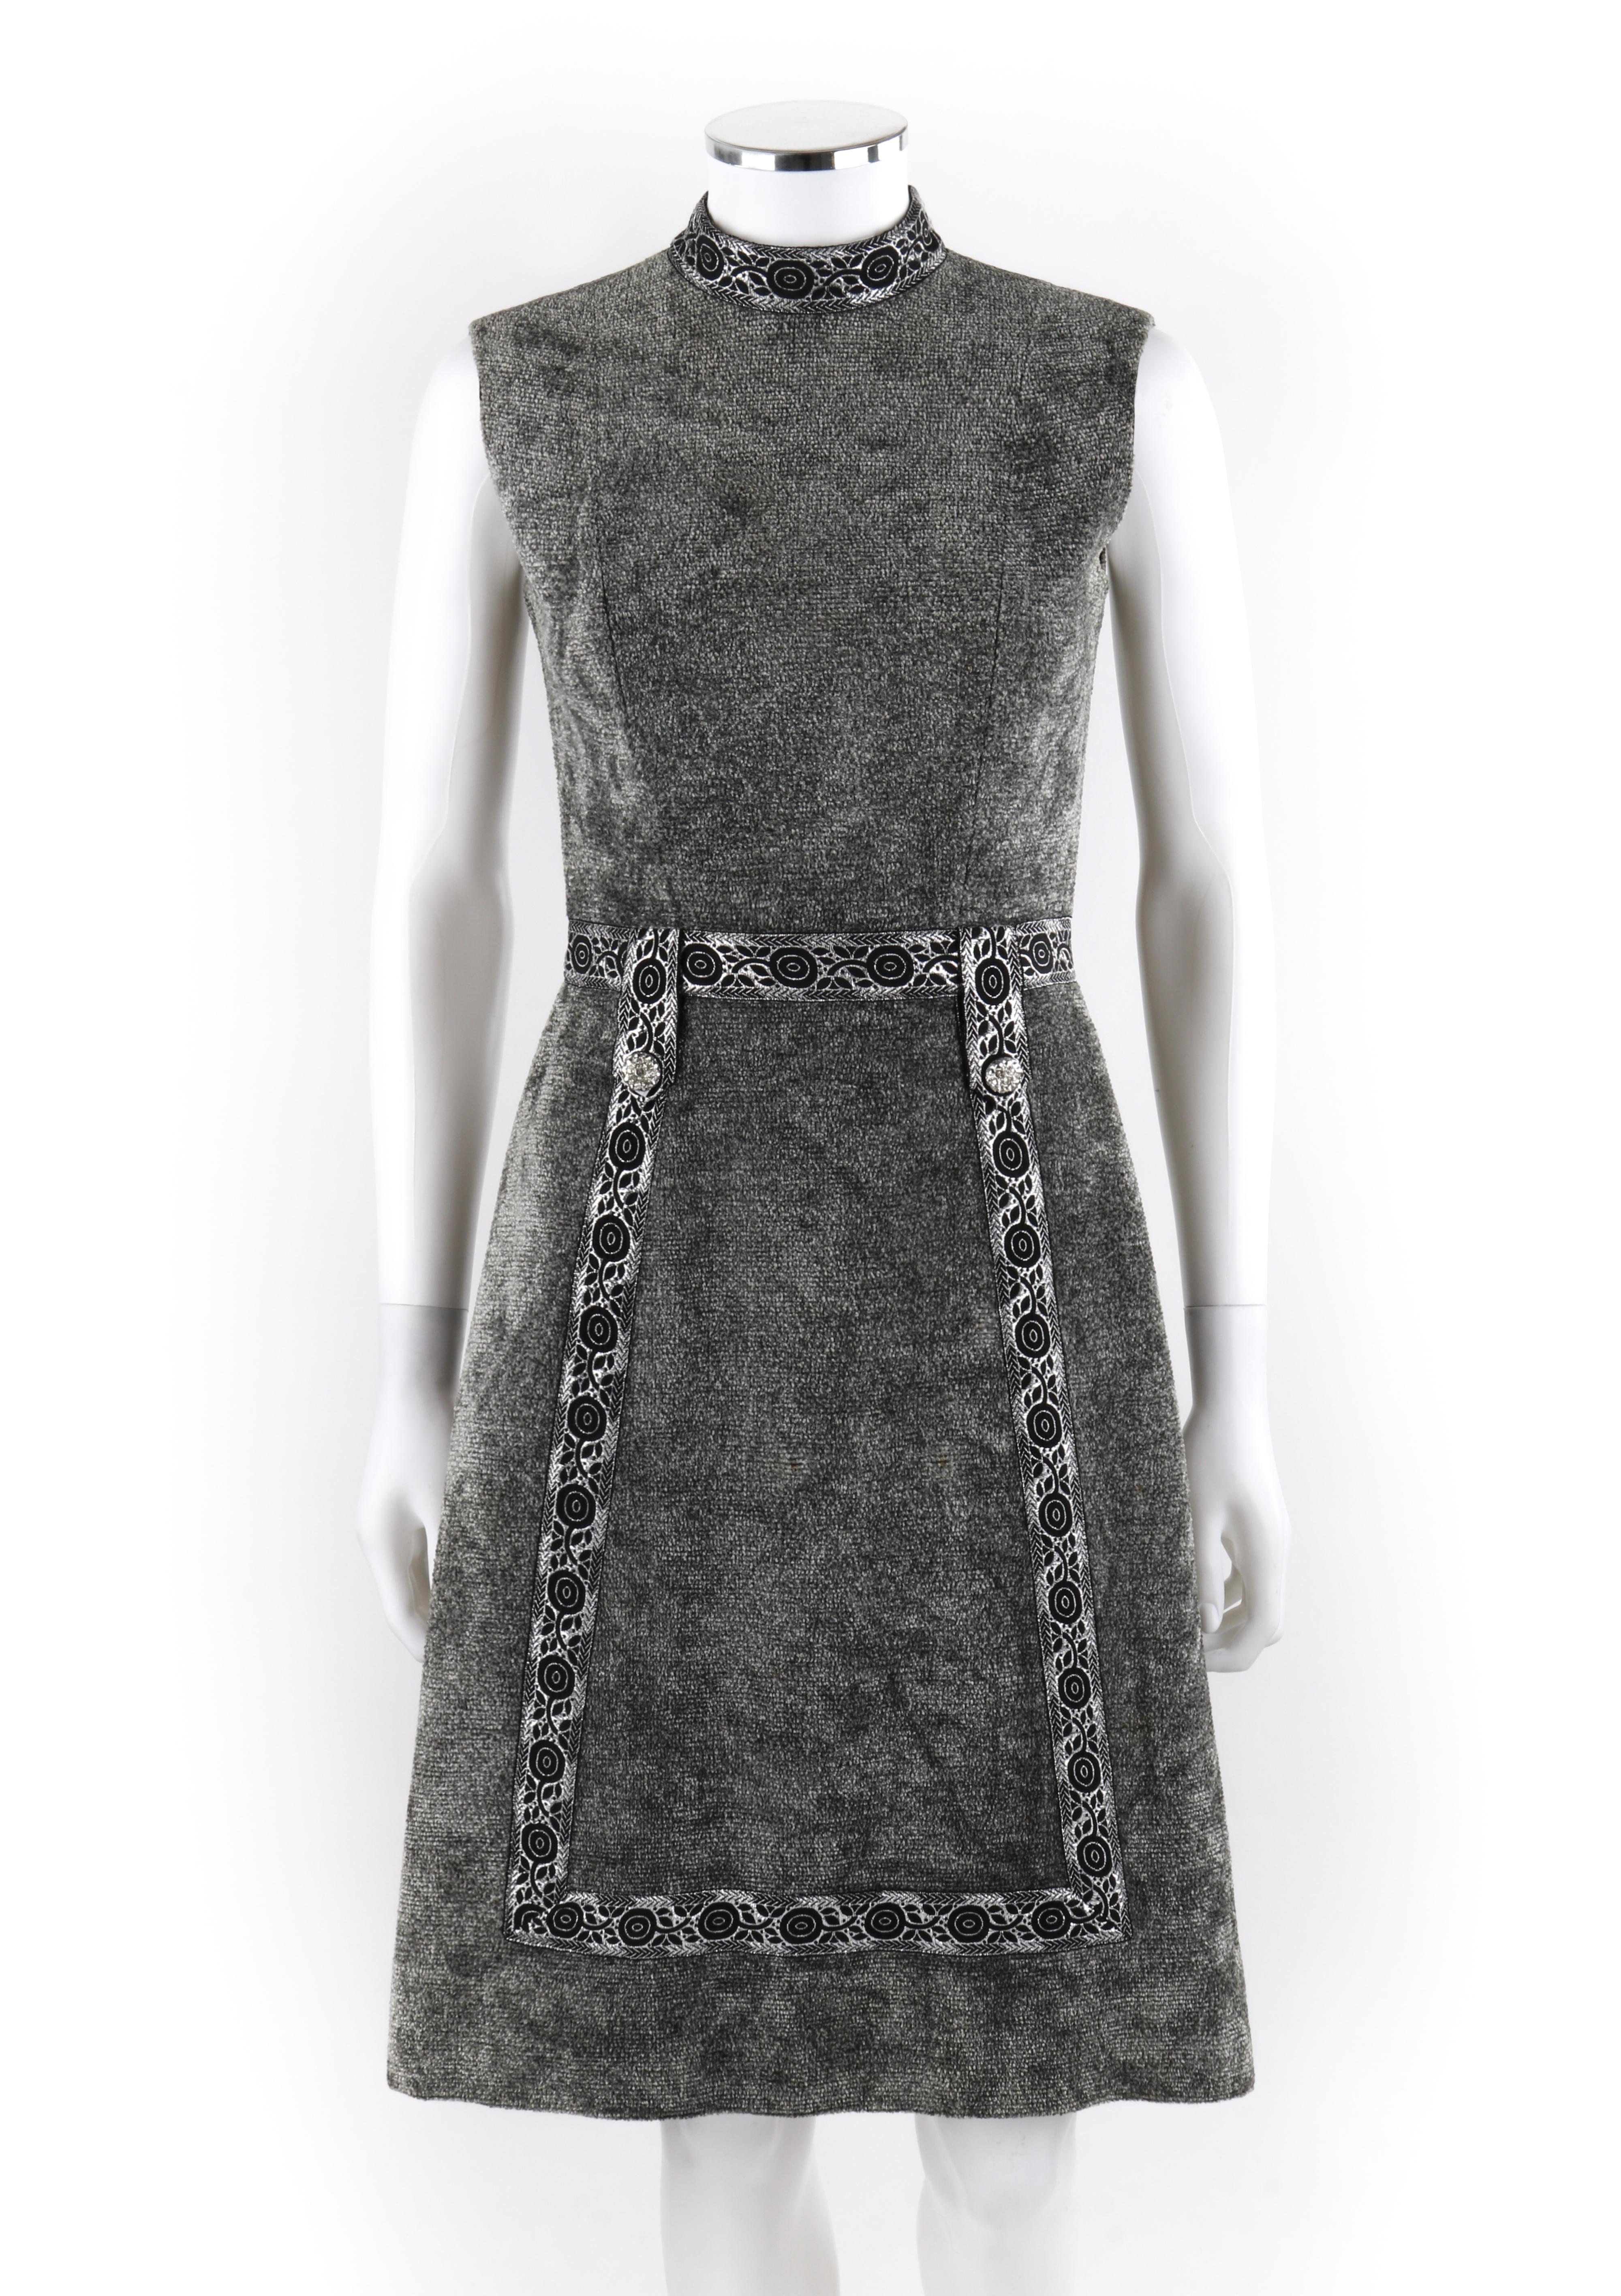 LESLIE FAY Original c.1960’s Gray Silver Mock Neck Sleeveless Mod A-line Dress

Circa: 1960’s
Label(s): Leslie Fay Original; ILGWU tag
Style: A-Line dress
Color(s): Shades of gray, silver, and black
Lined: Partial 
Unmarked Fabric Content (feel of):